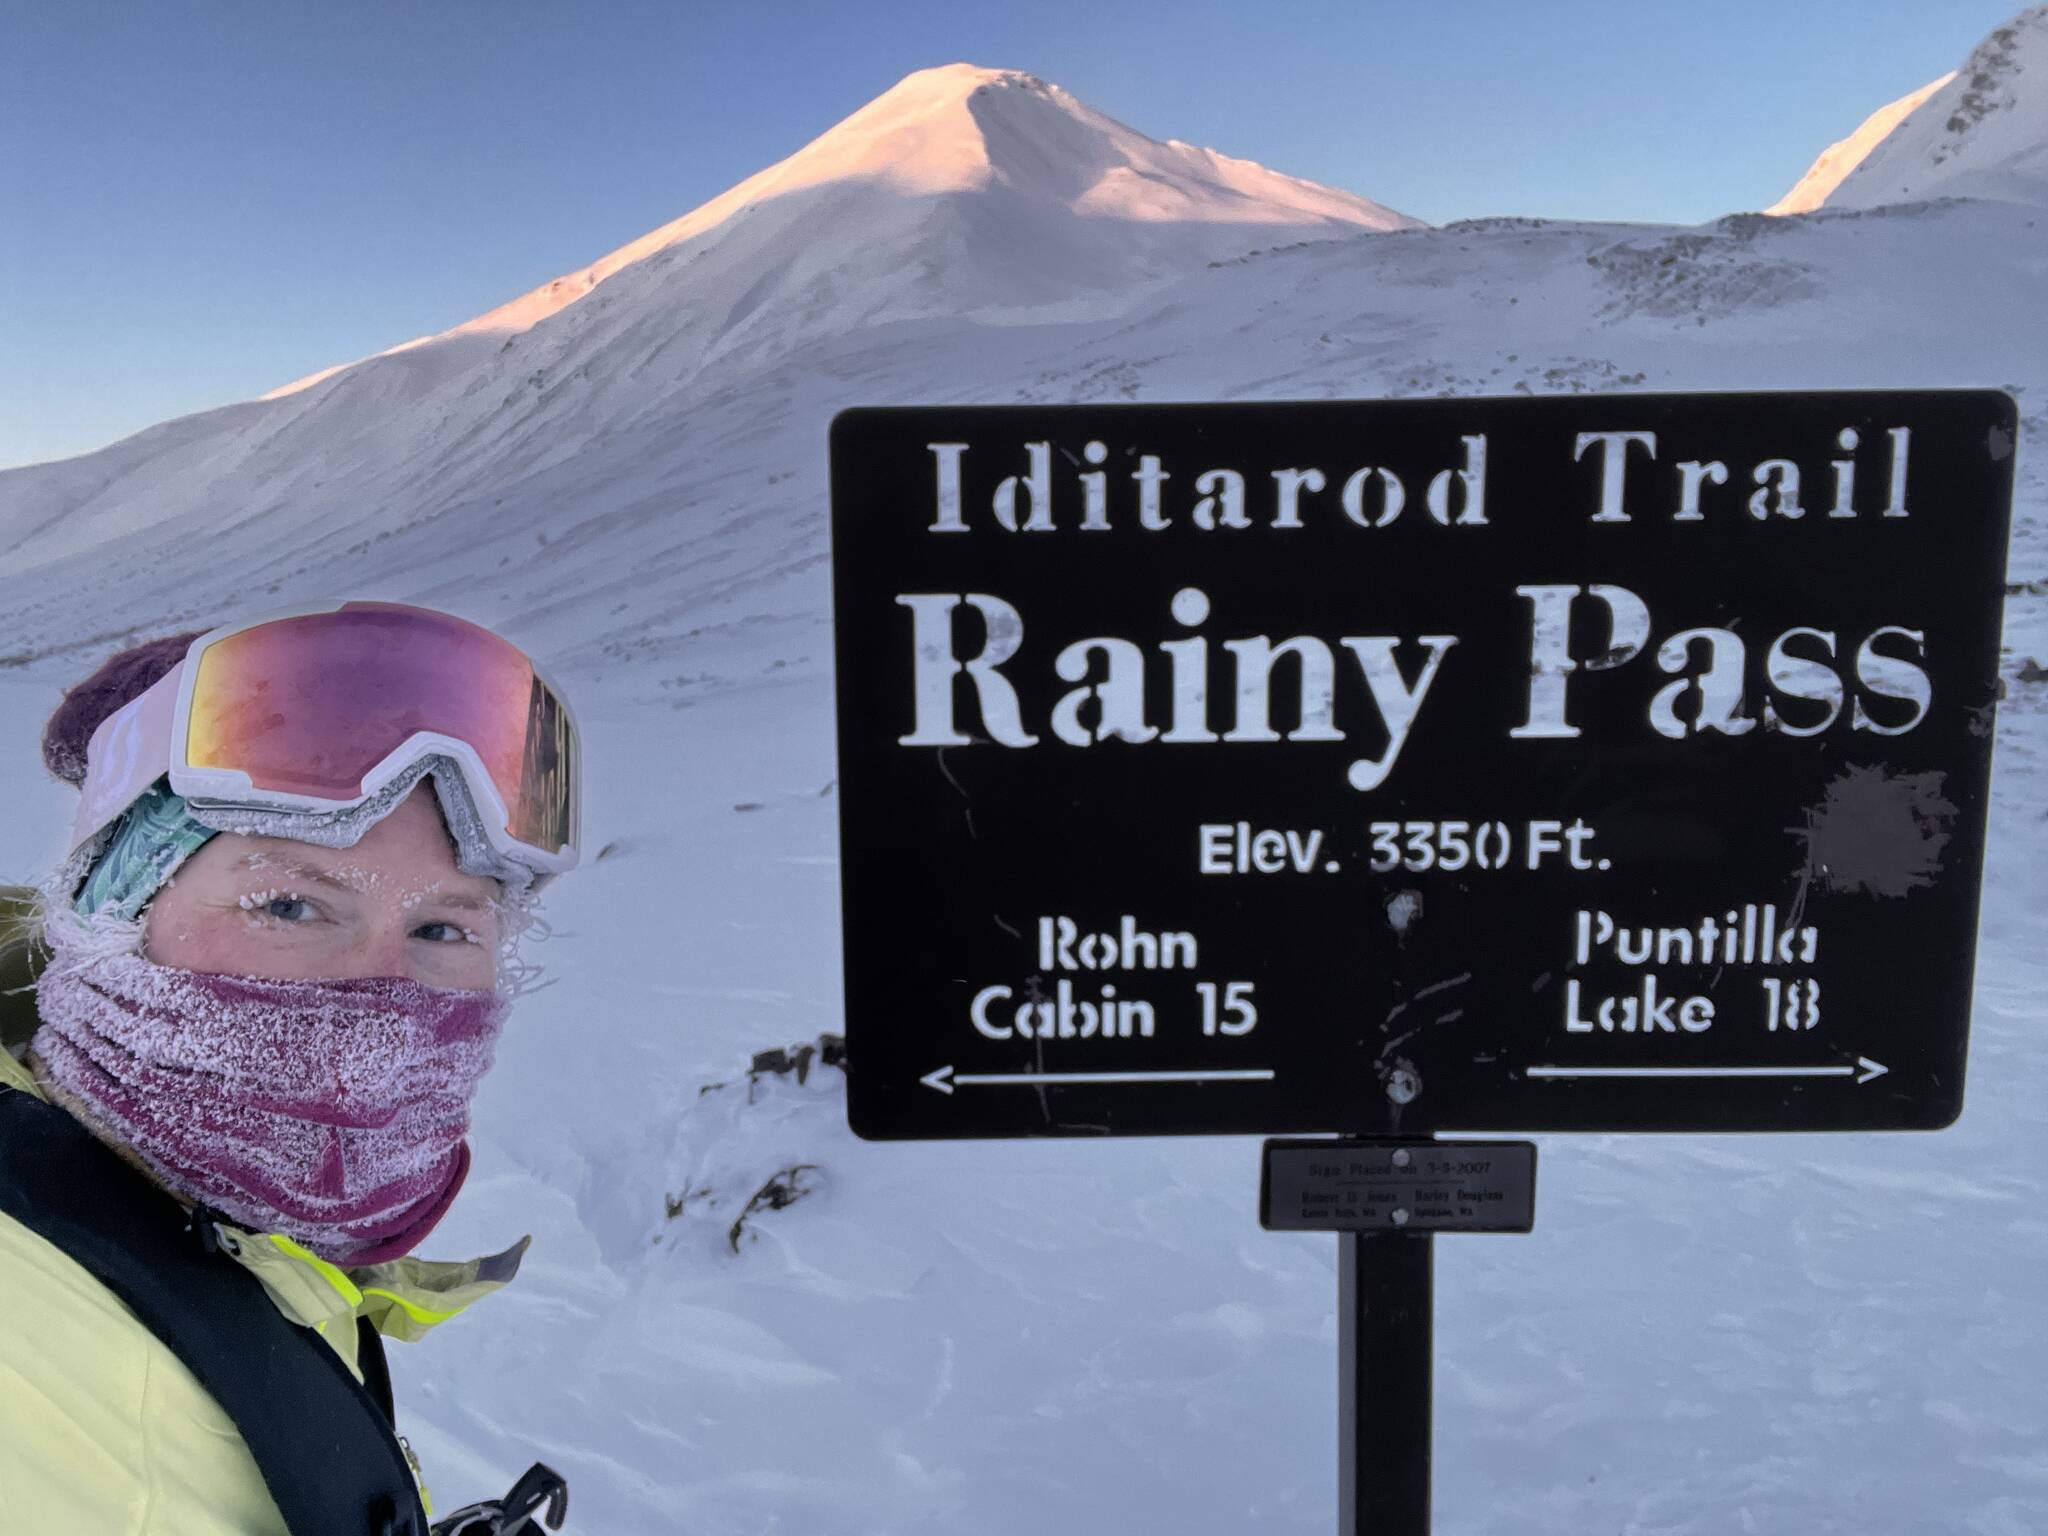 Photos provided by Jaclyn Arndt
Jaclyn Arndt reaches Rainy Pass <ins>on Friday,</ins> March 3<ins>, 2023</ins> during the 2023 Iditarod Trail Invitational.